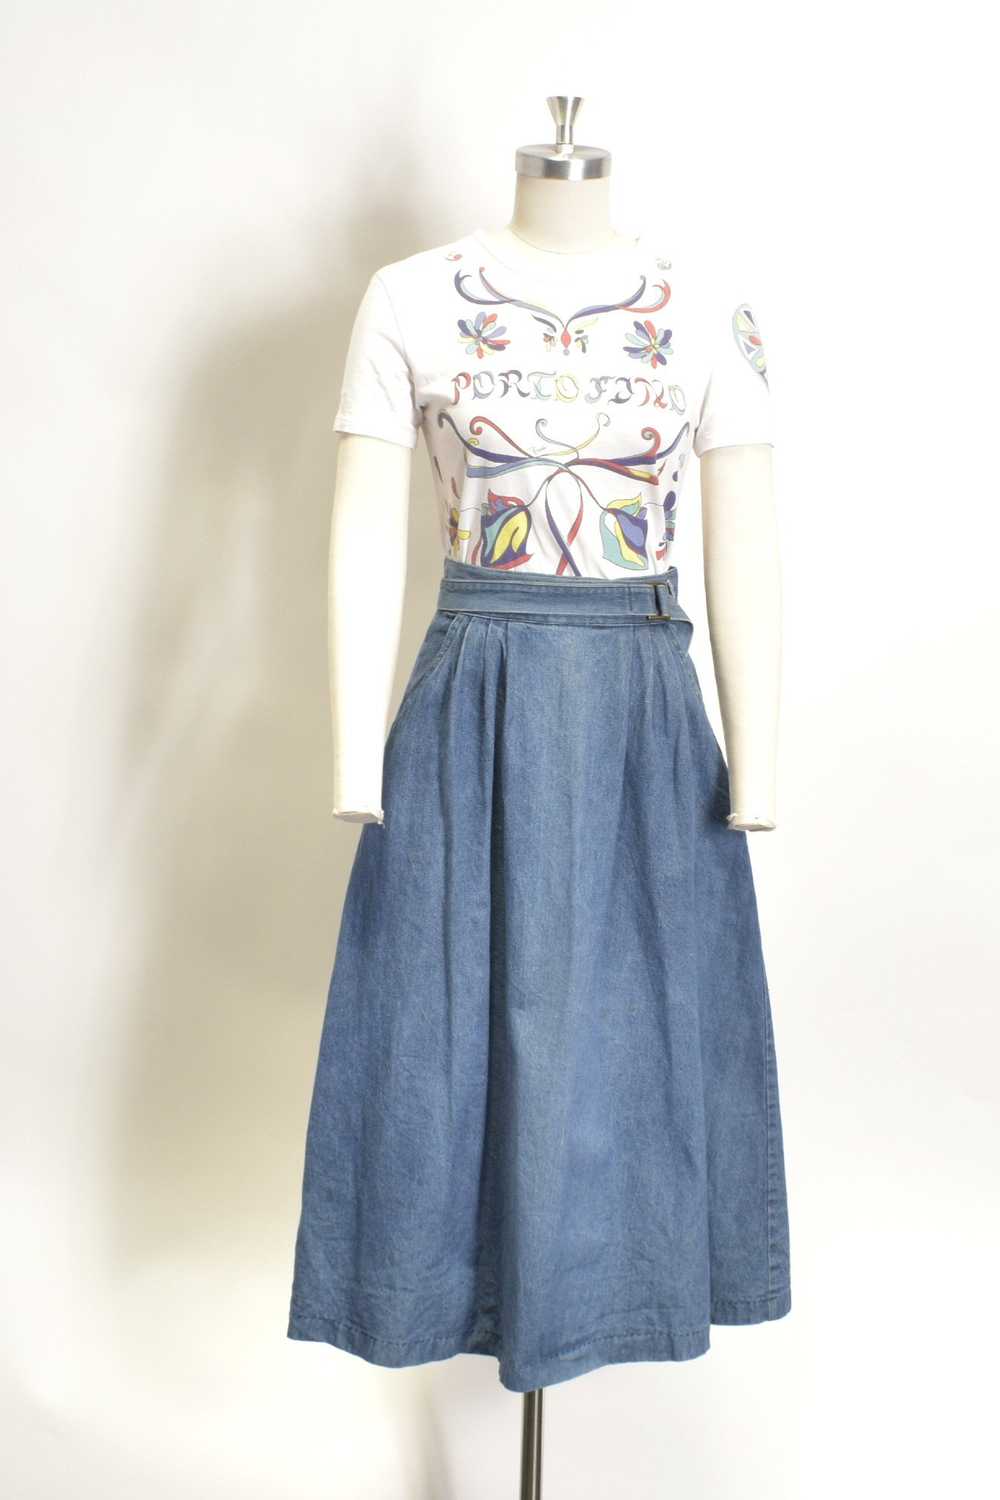 1980s Wool and Leather Skirt-small - image 10